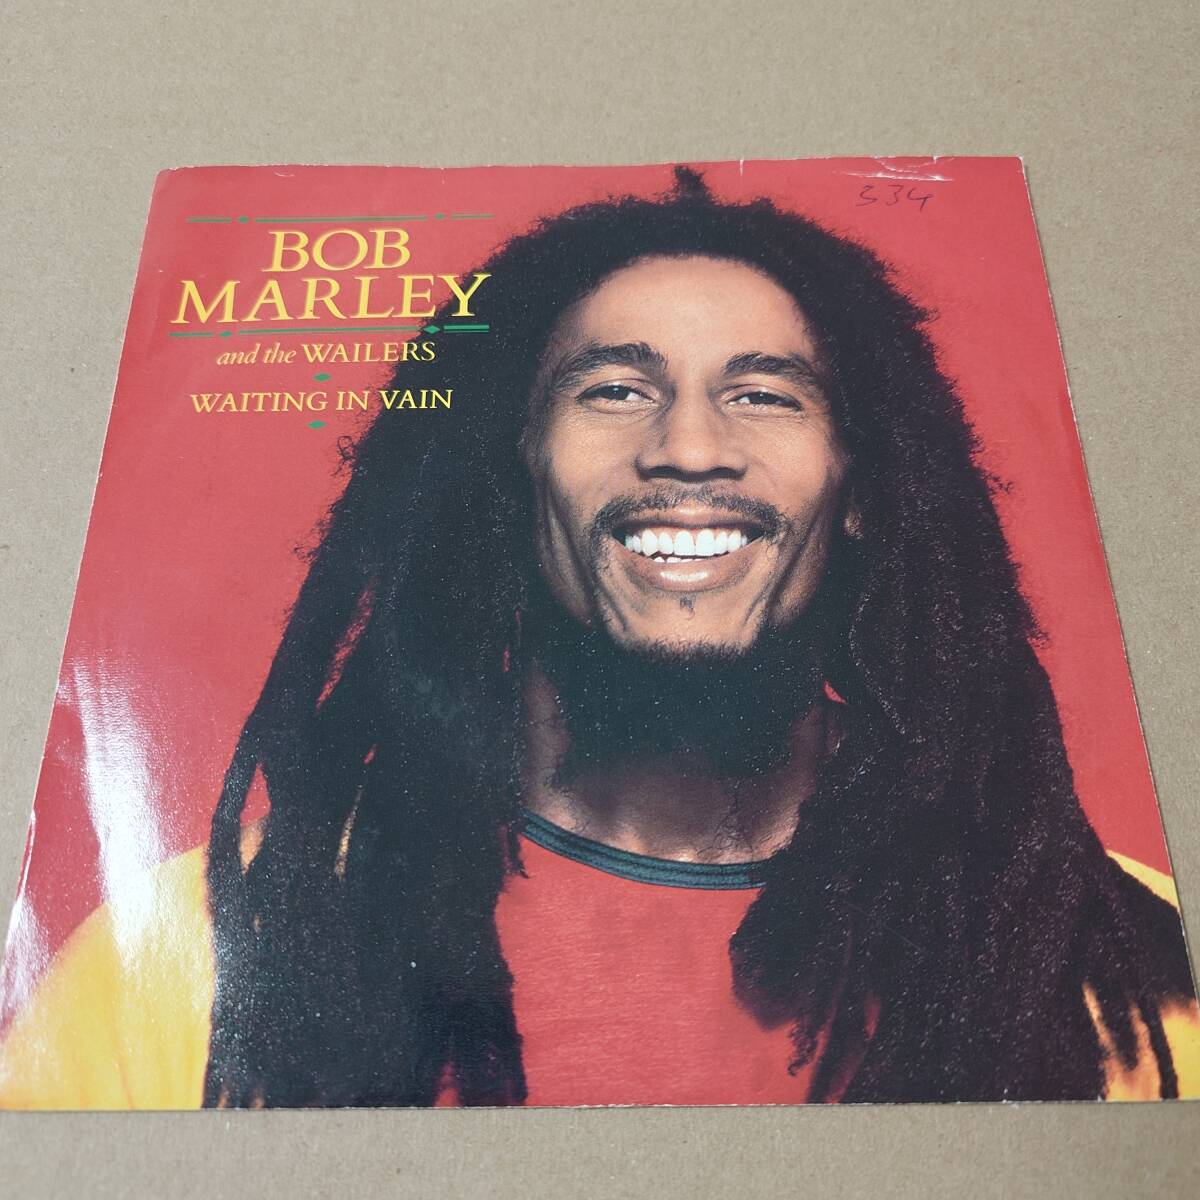 Bob Marley & The Wailers - Waiting In Vain / Blackman Redemption // Island Records 7inch / Rootsの画像1